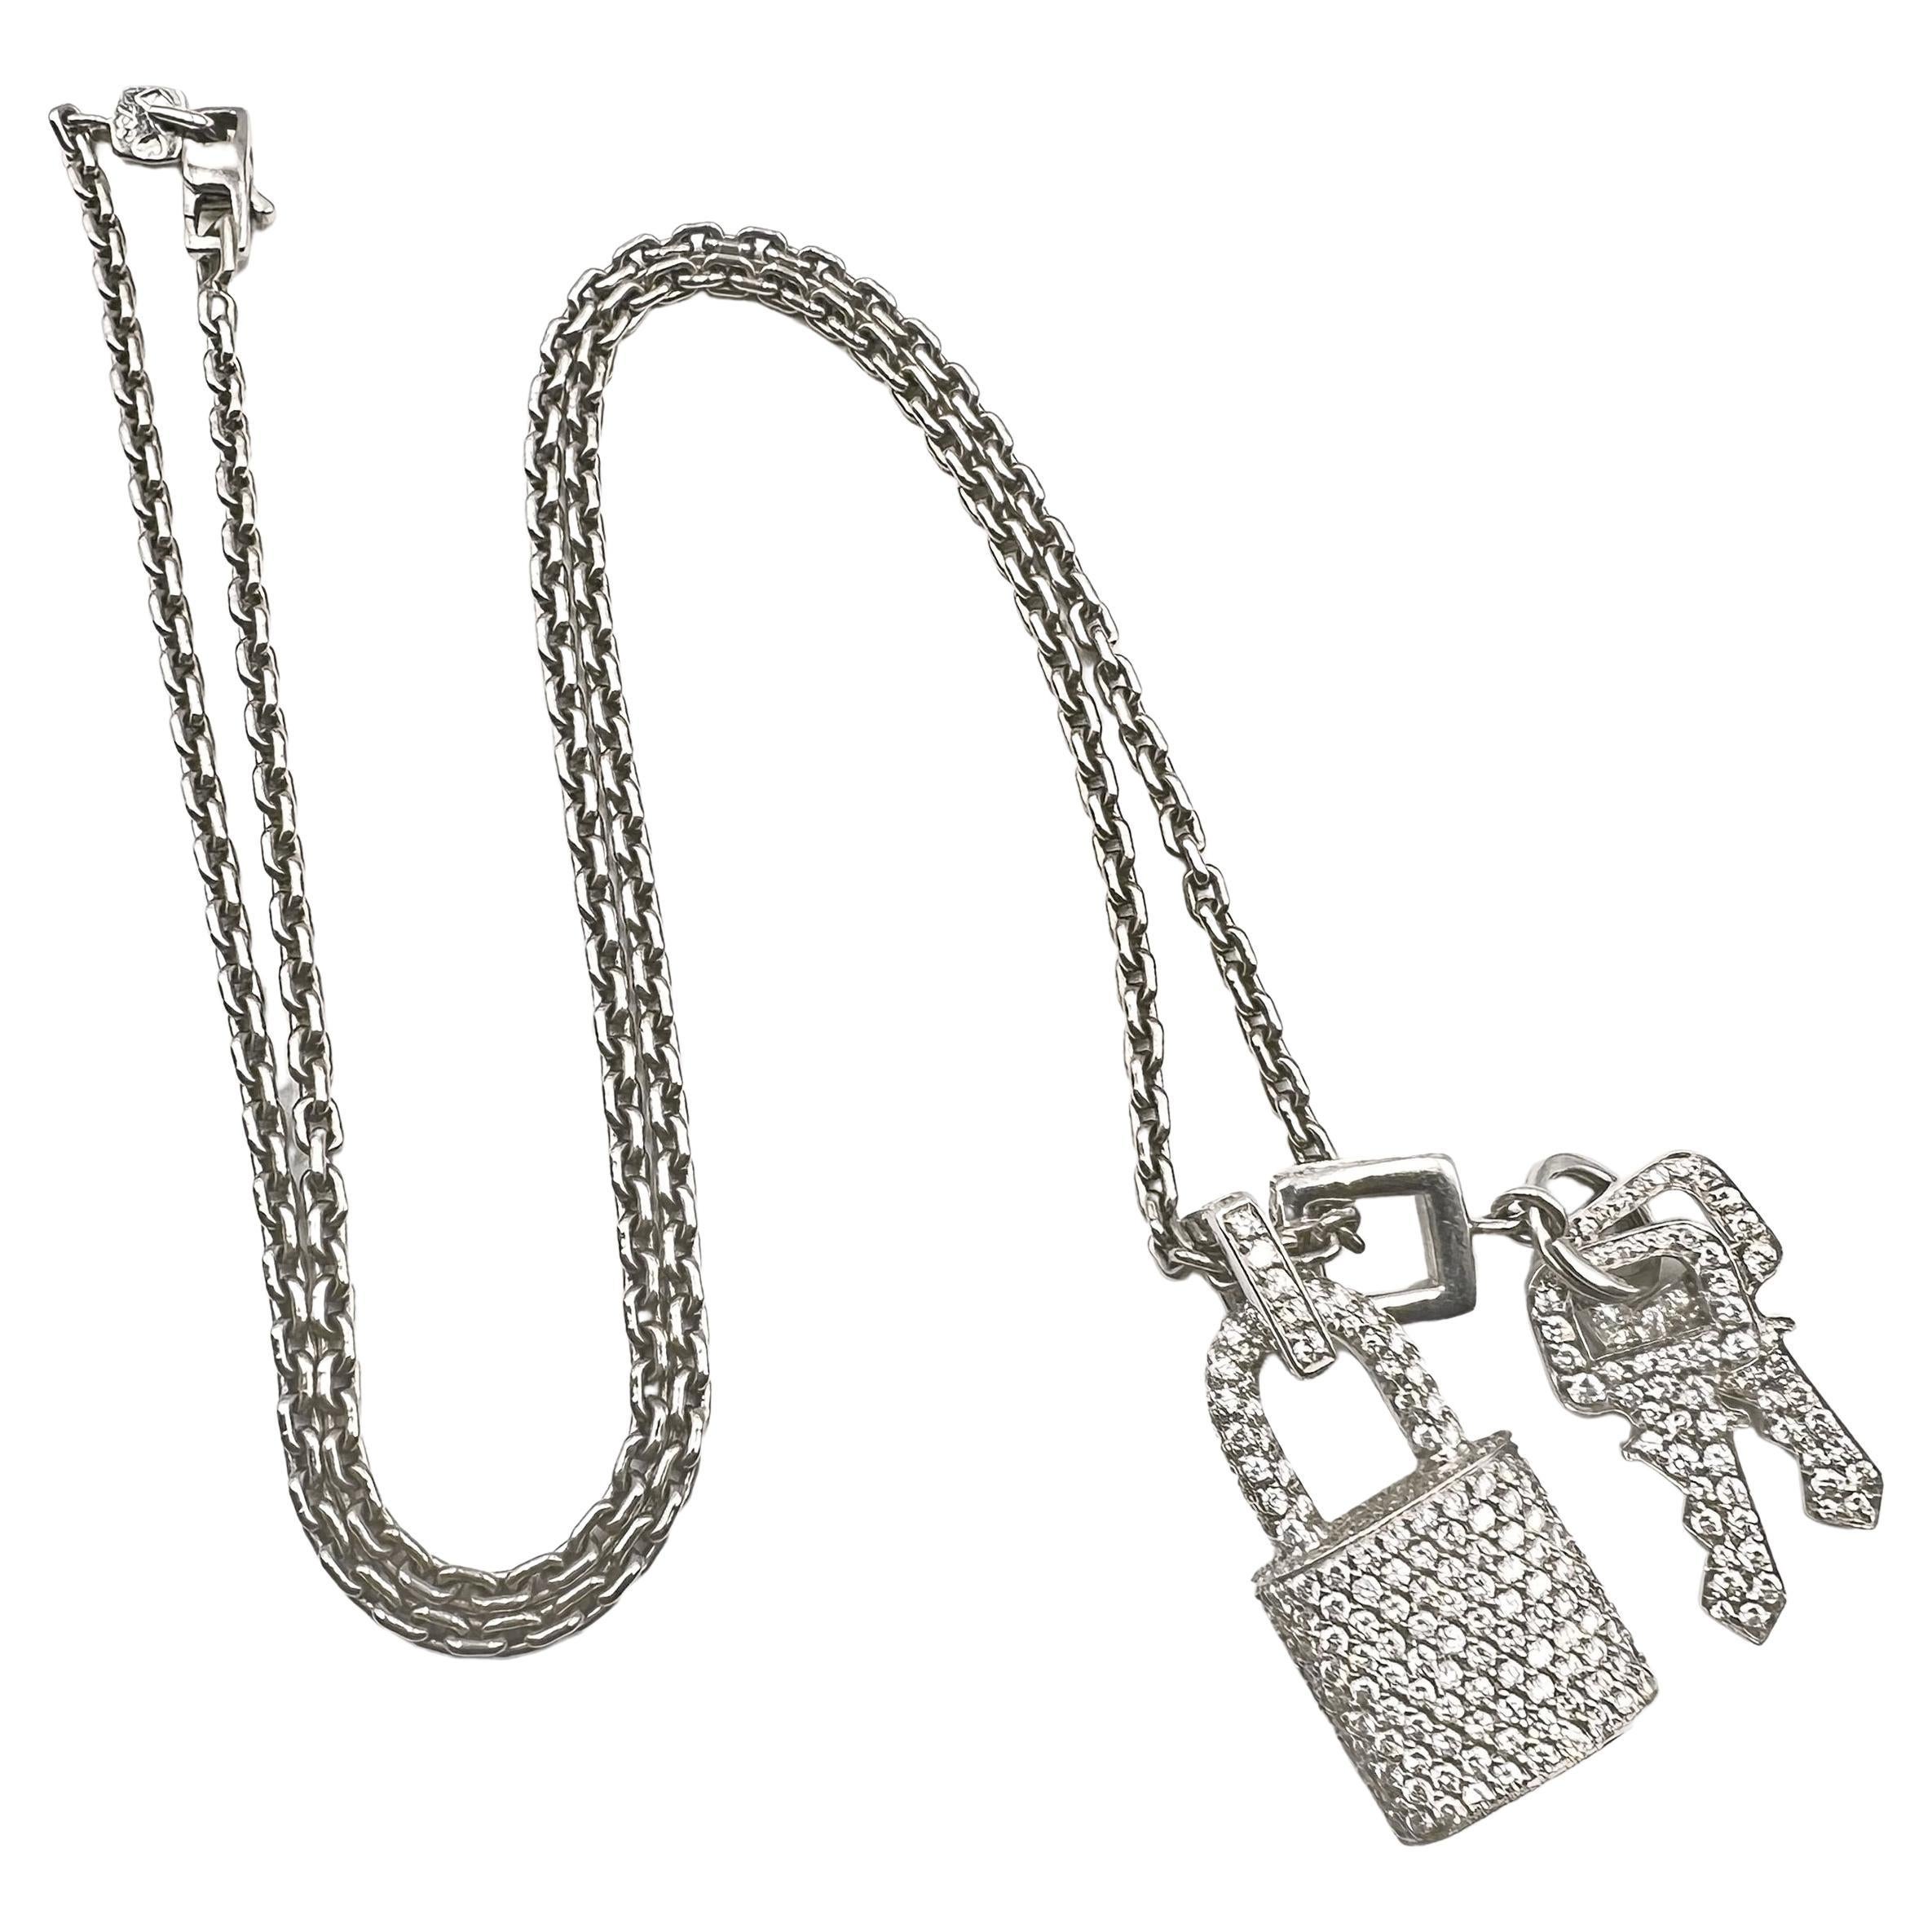 Two pendants by Louis Vuitton pave-set with round brilliant-cut diamonds throughout.   The miniature lock pendant has a square form bail with a 